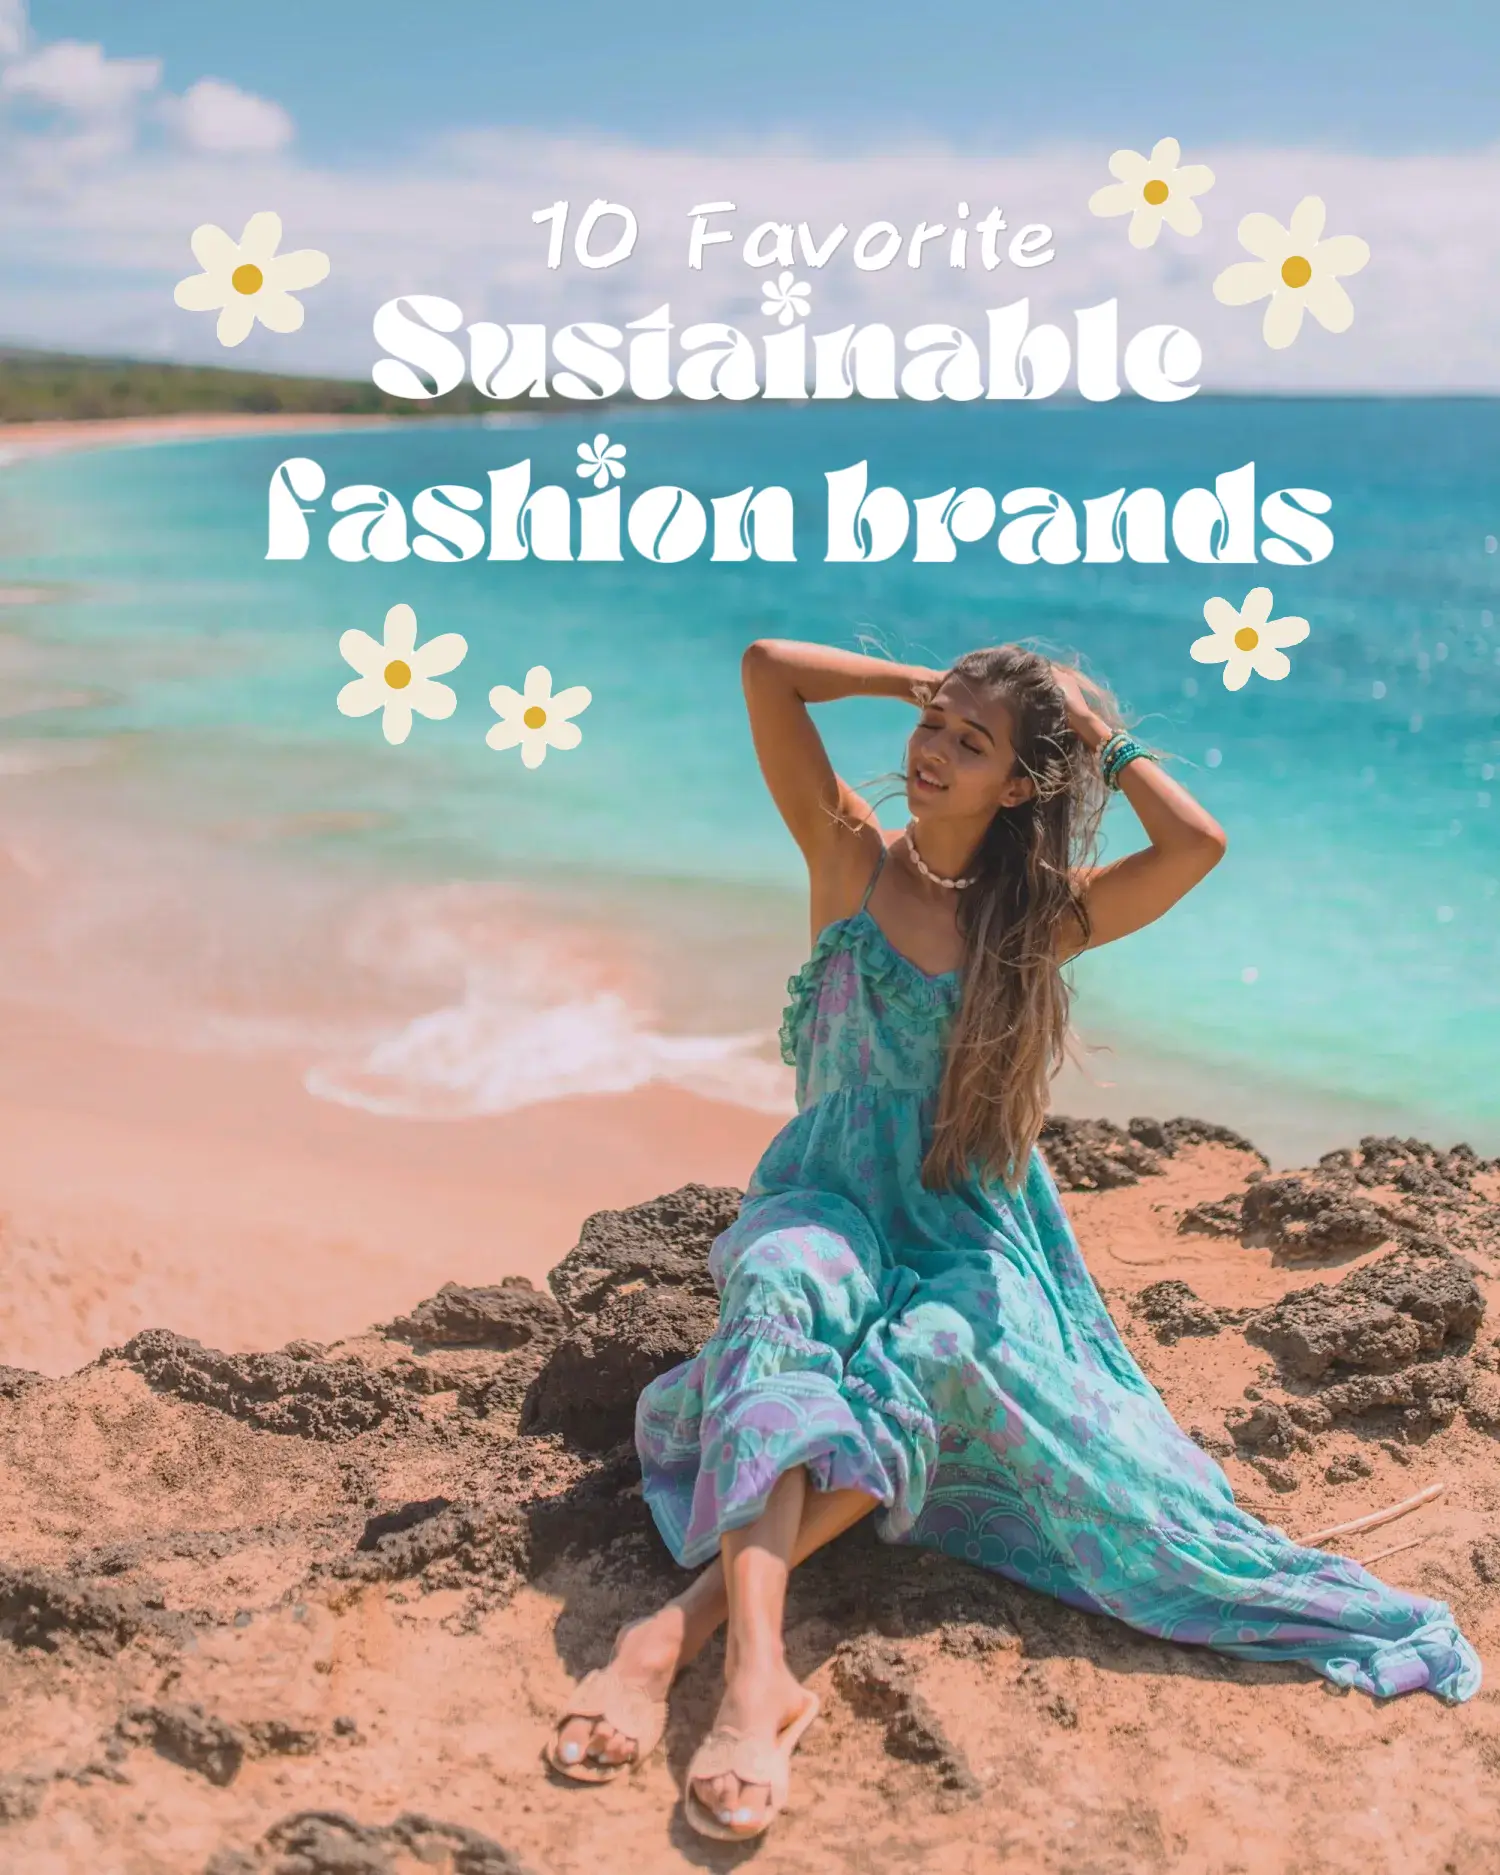 FINALLY! a sustainable fitness clothing brand ❤️